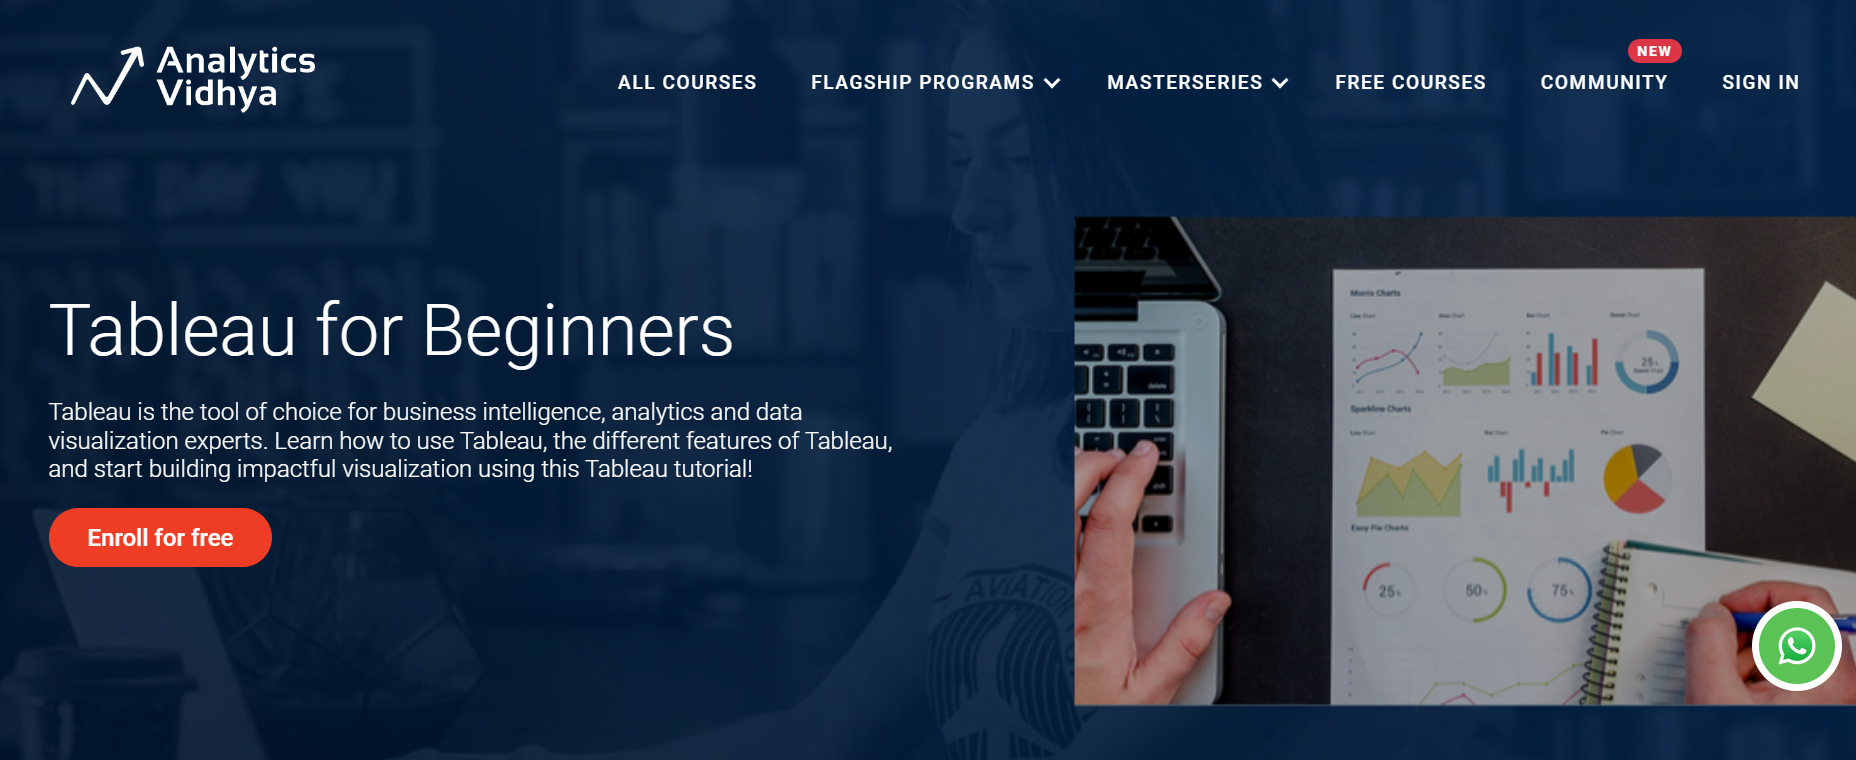 Tableau for Beginners